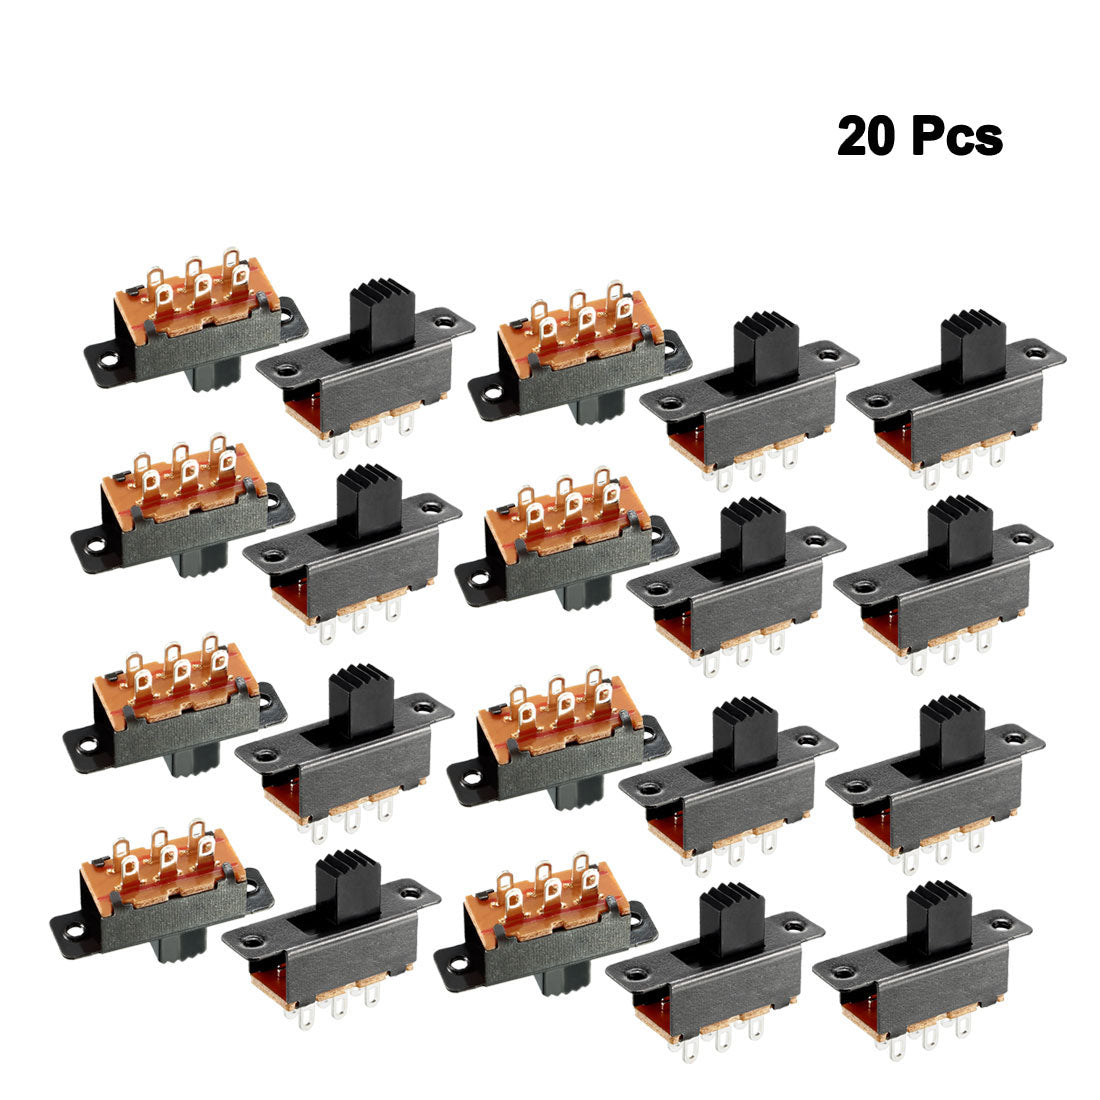 uxcell Uxcell 20Pcs 5mm Vertical Slide Switch DPDT 6 Terminals PCB Panel Latching